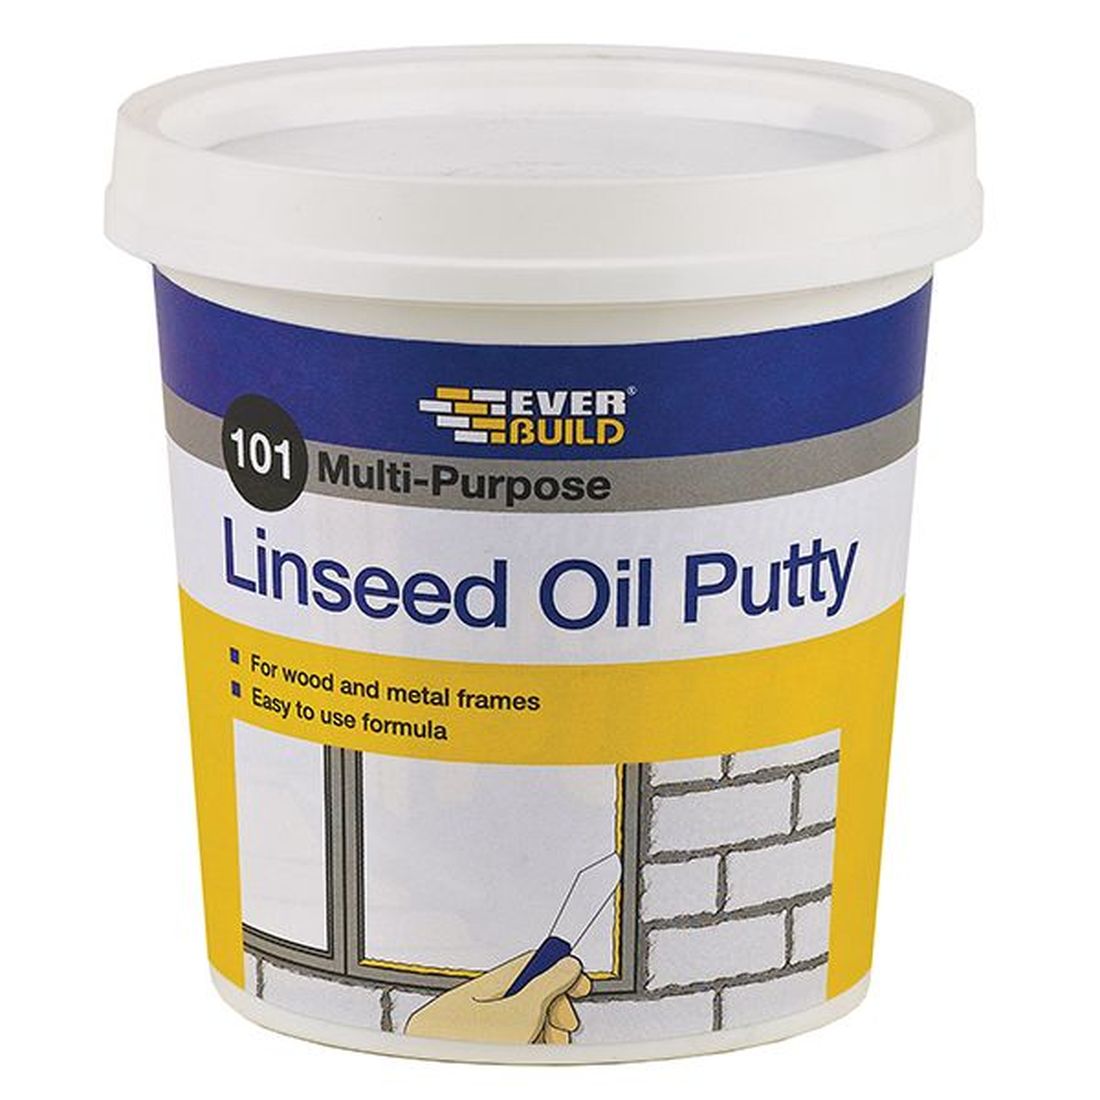 Everbuild 101 Multi-Purpose Linseed Oil Putty Natural 500g                                